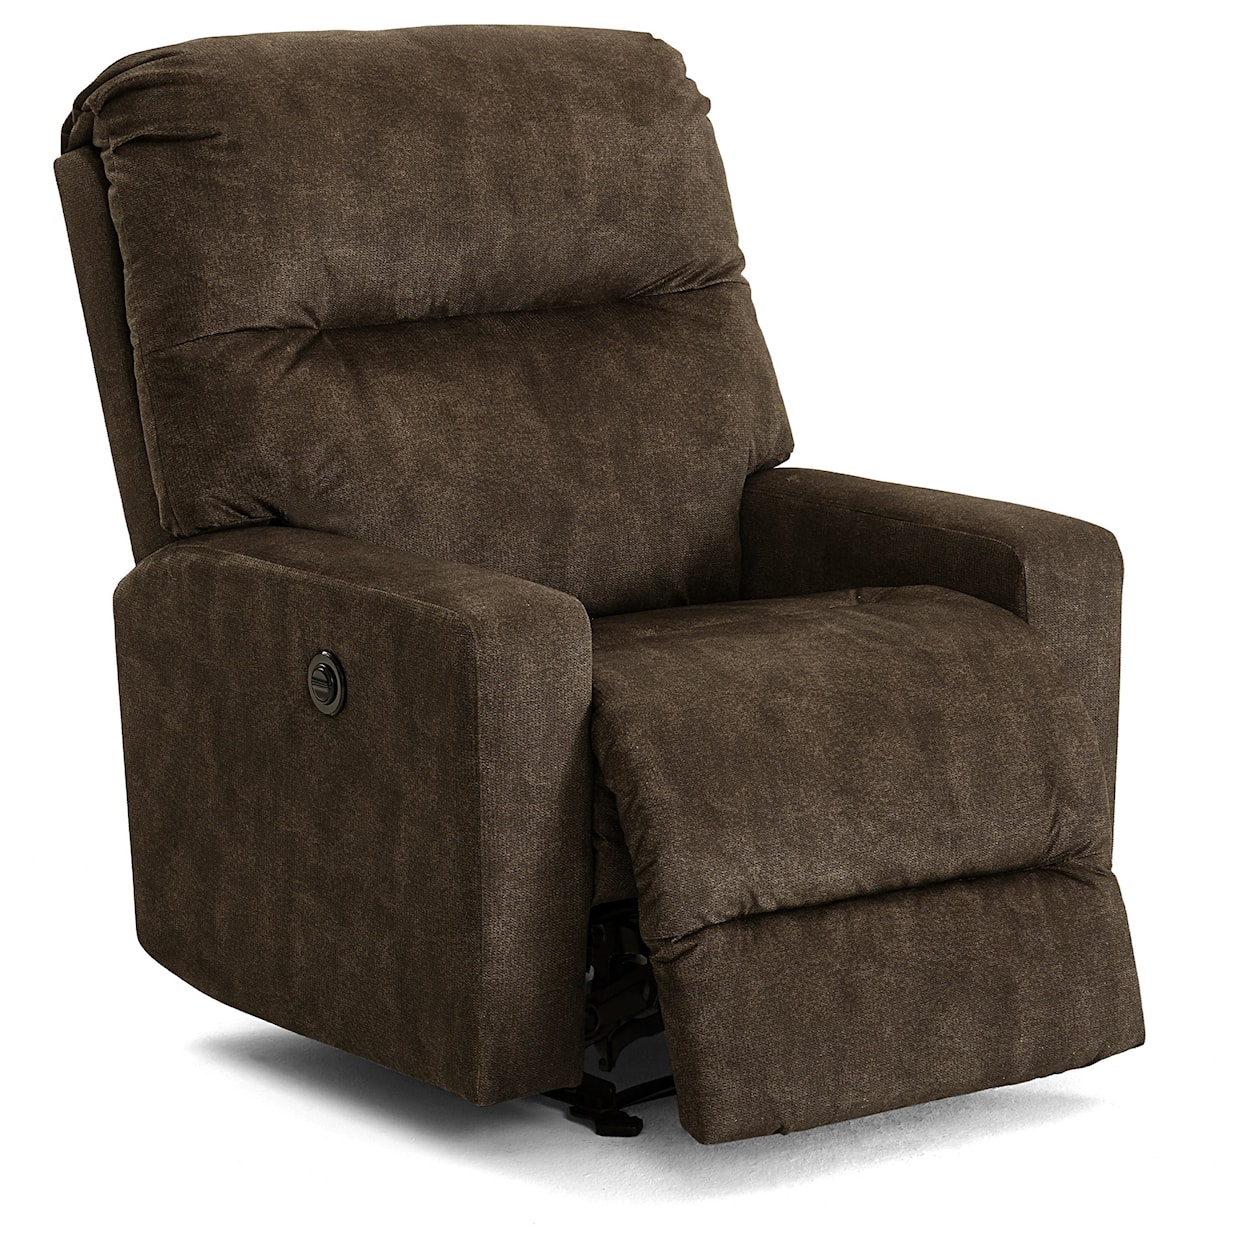 Best Home Furnishings Kenley Power Space Saver Recliner w/ PWR HR